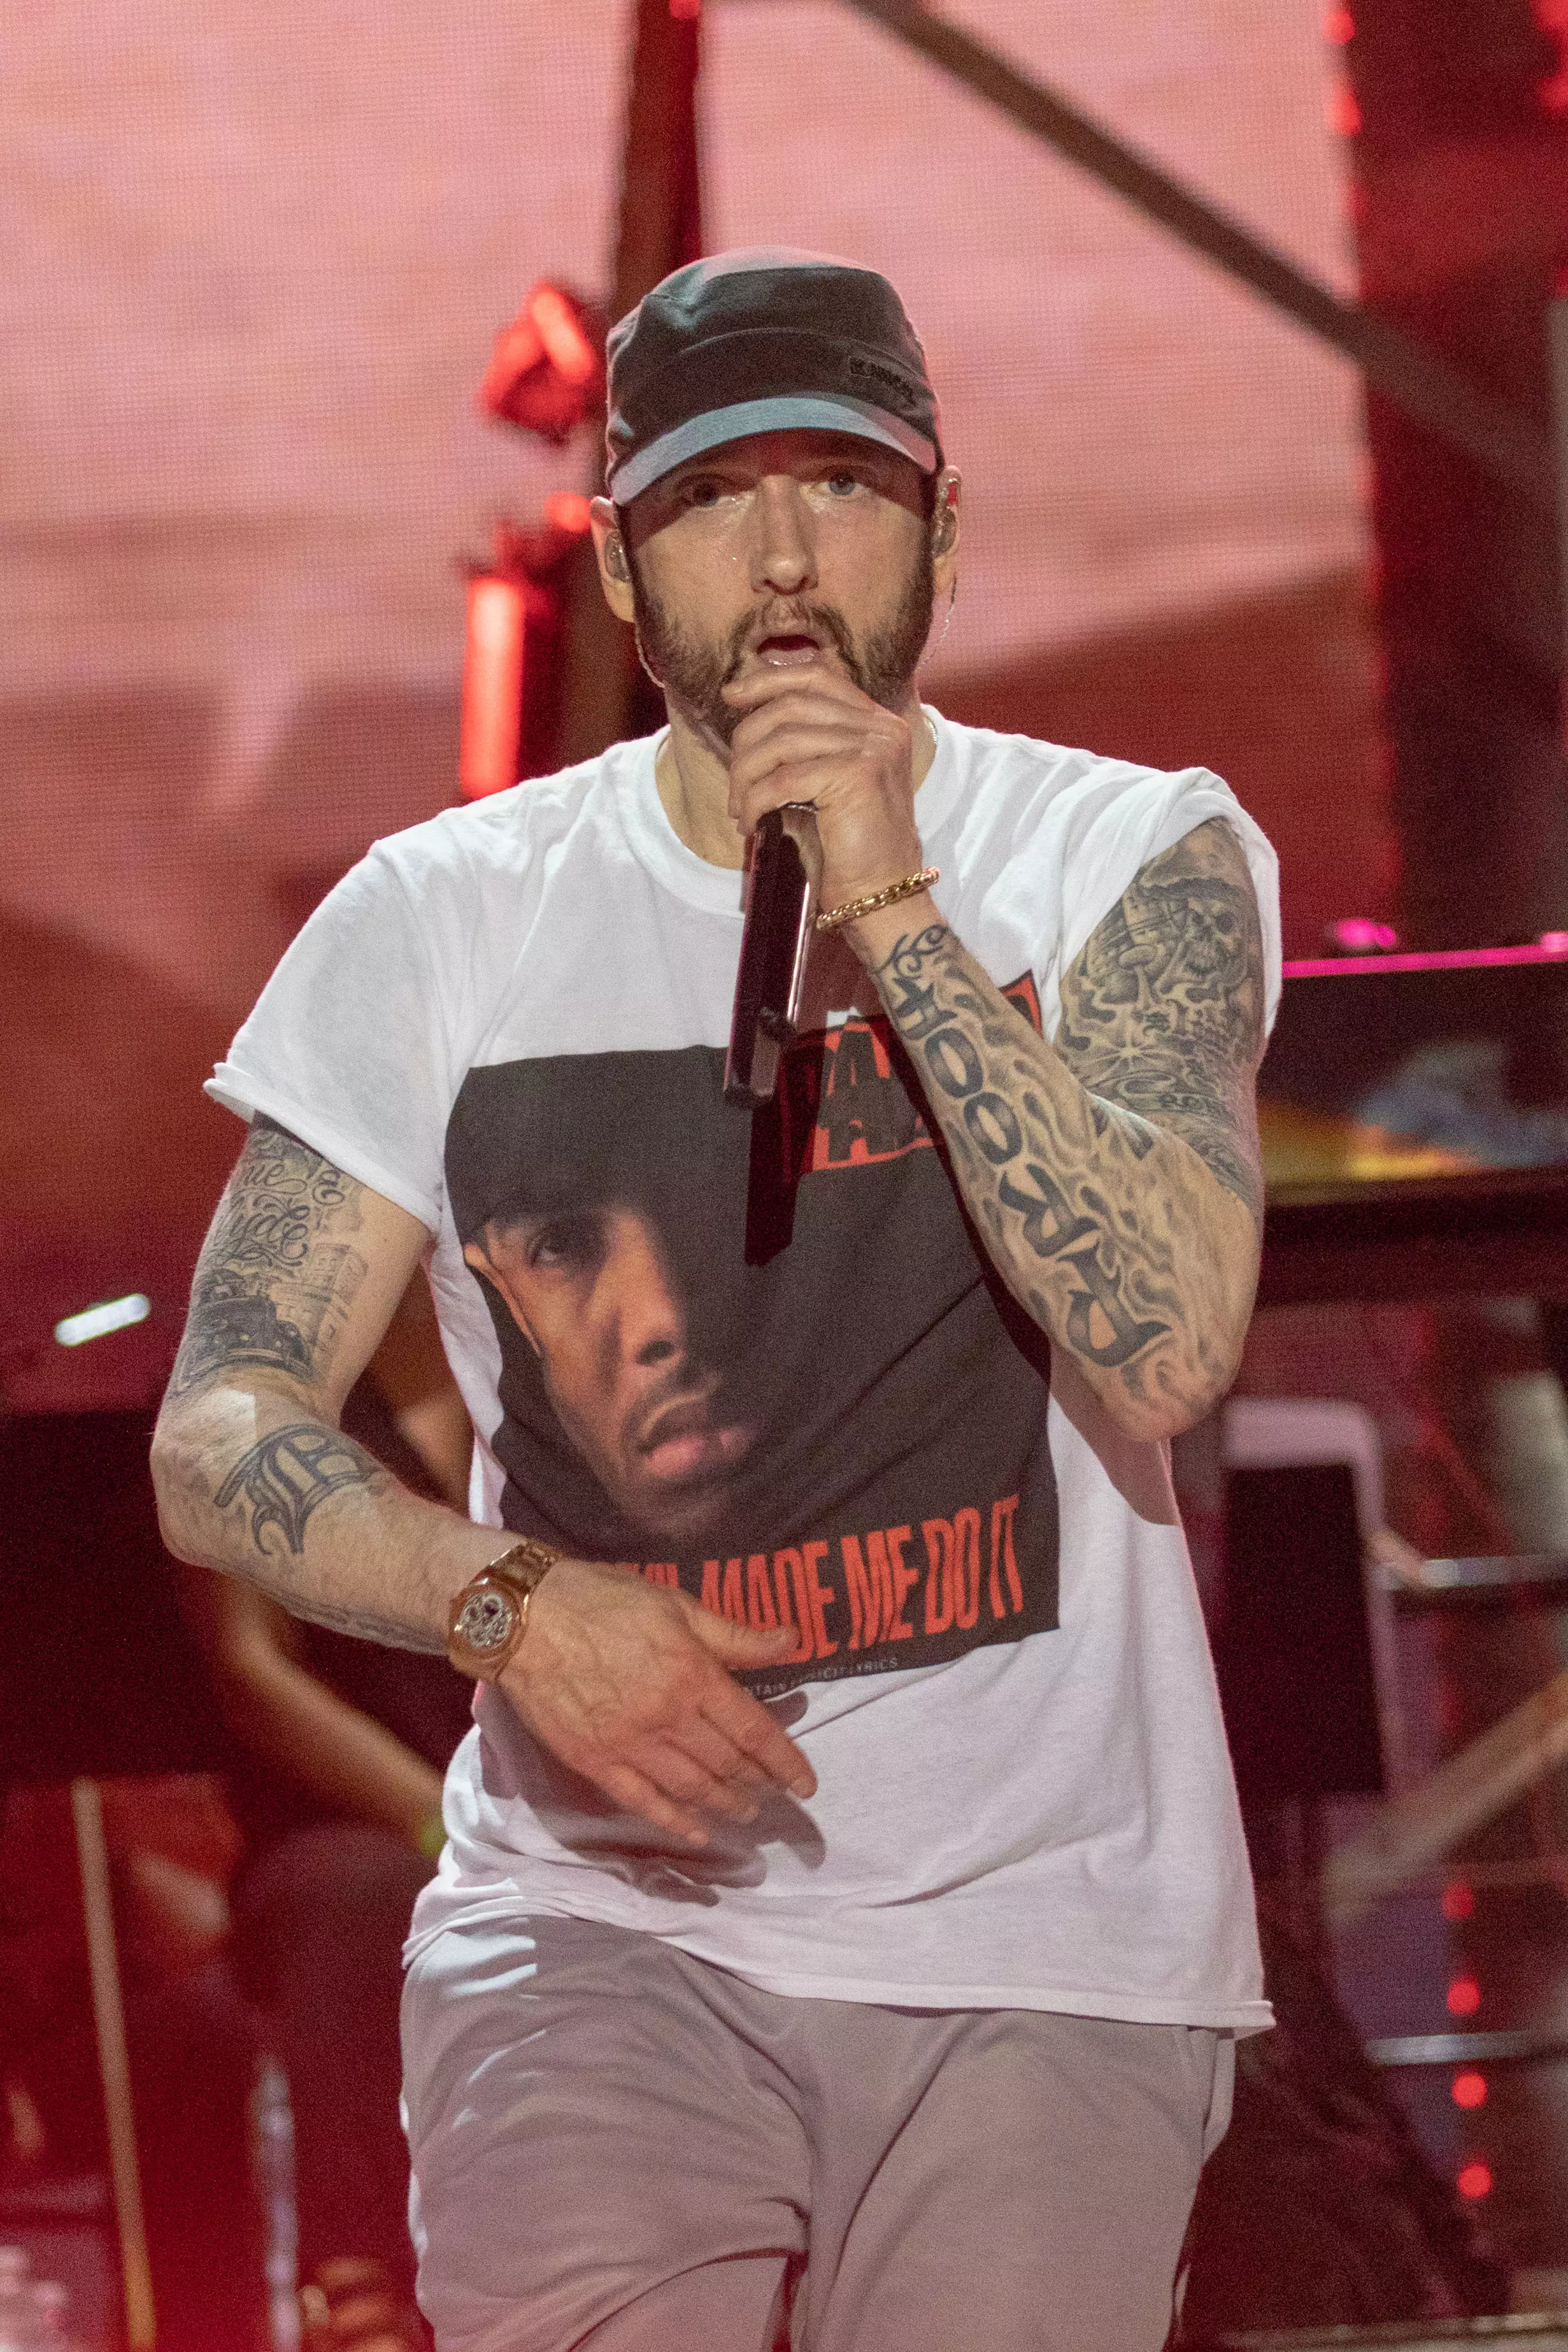 Eminem has yet to respond to reports of the donation.